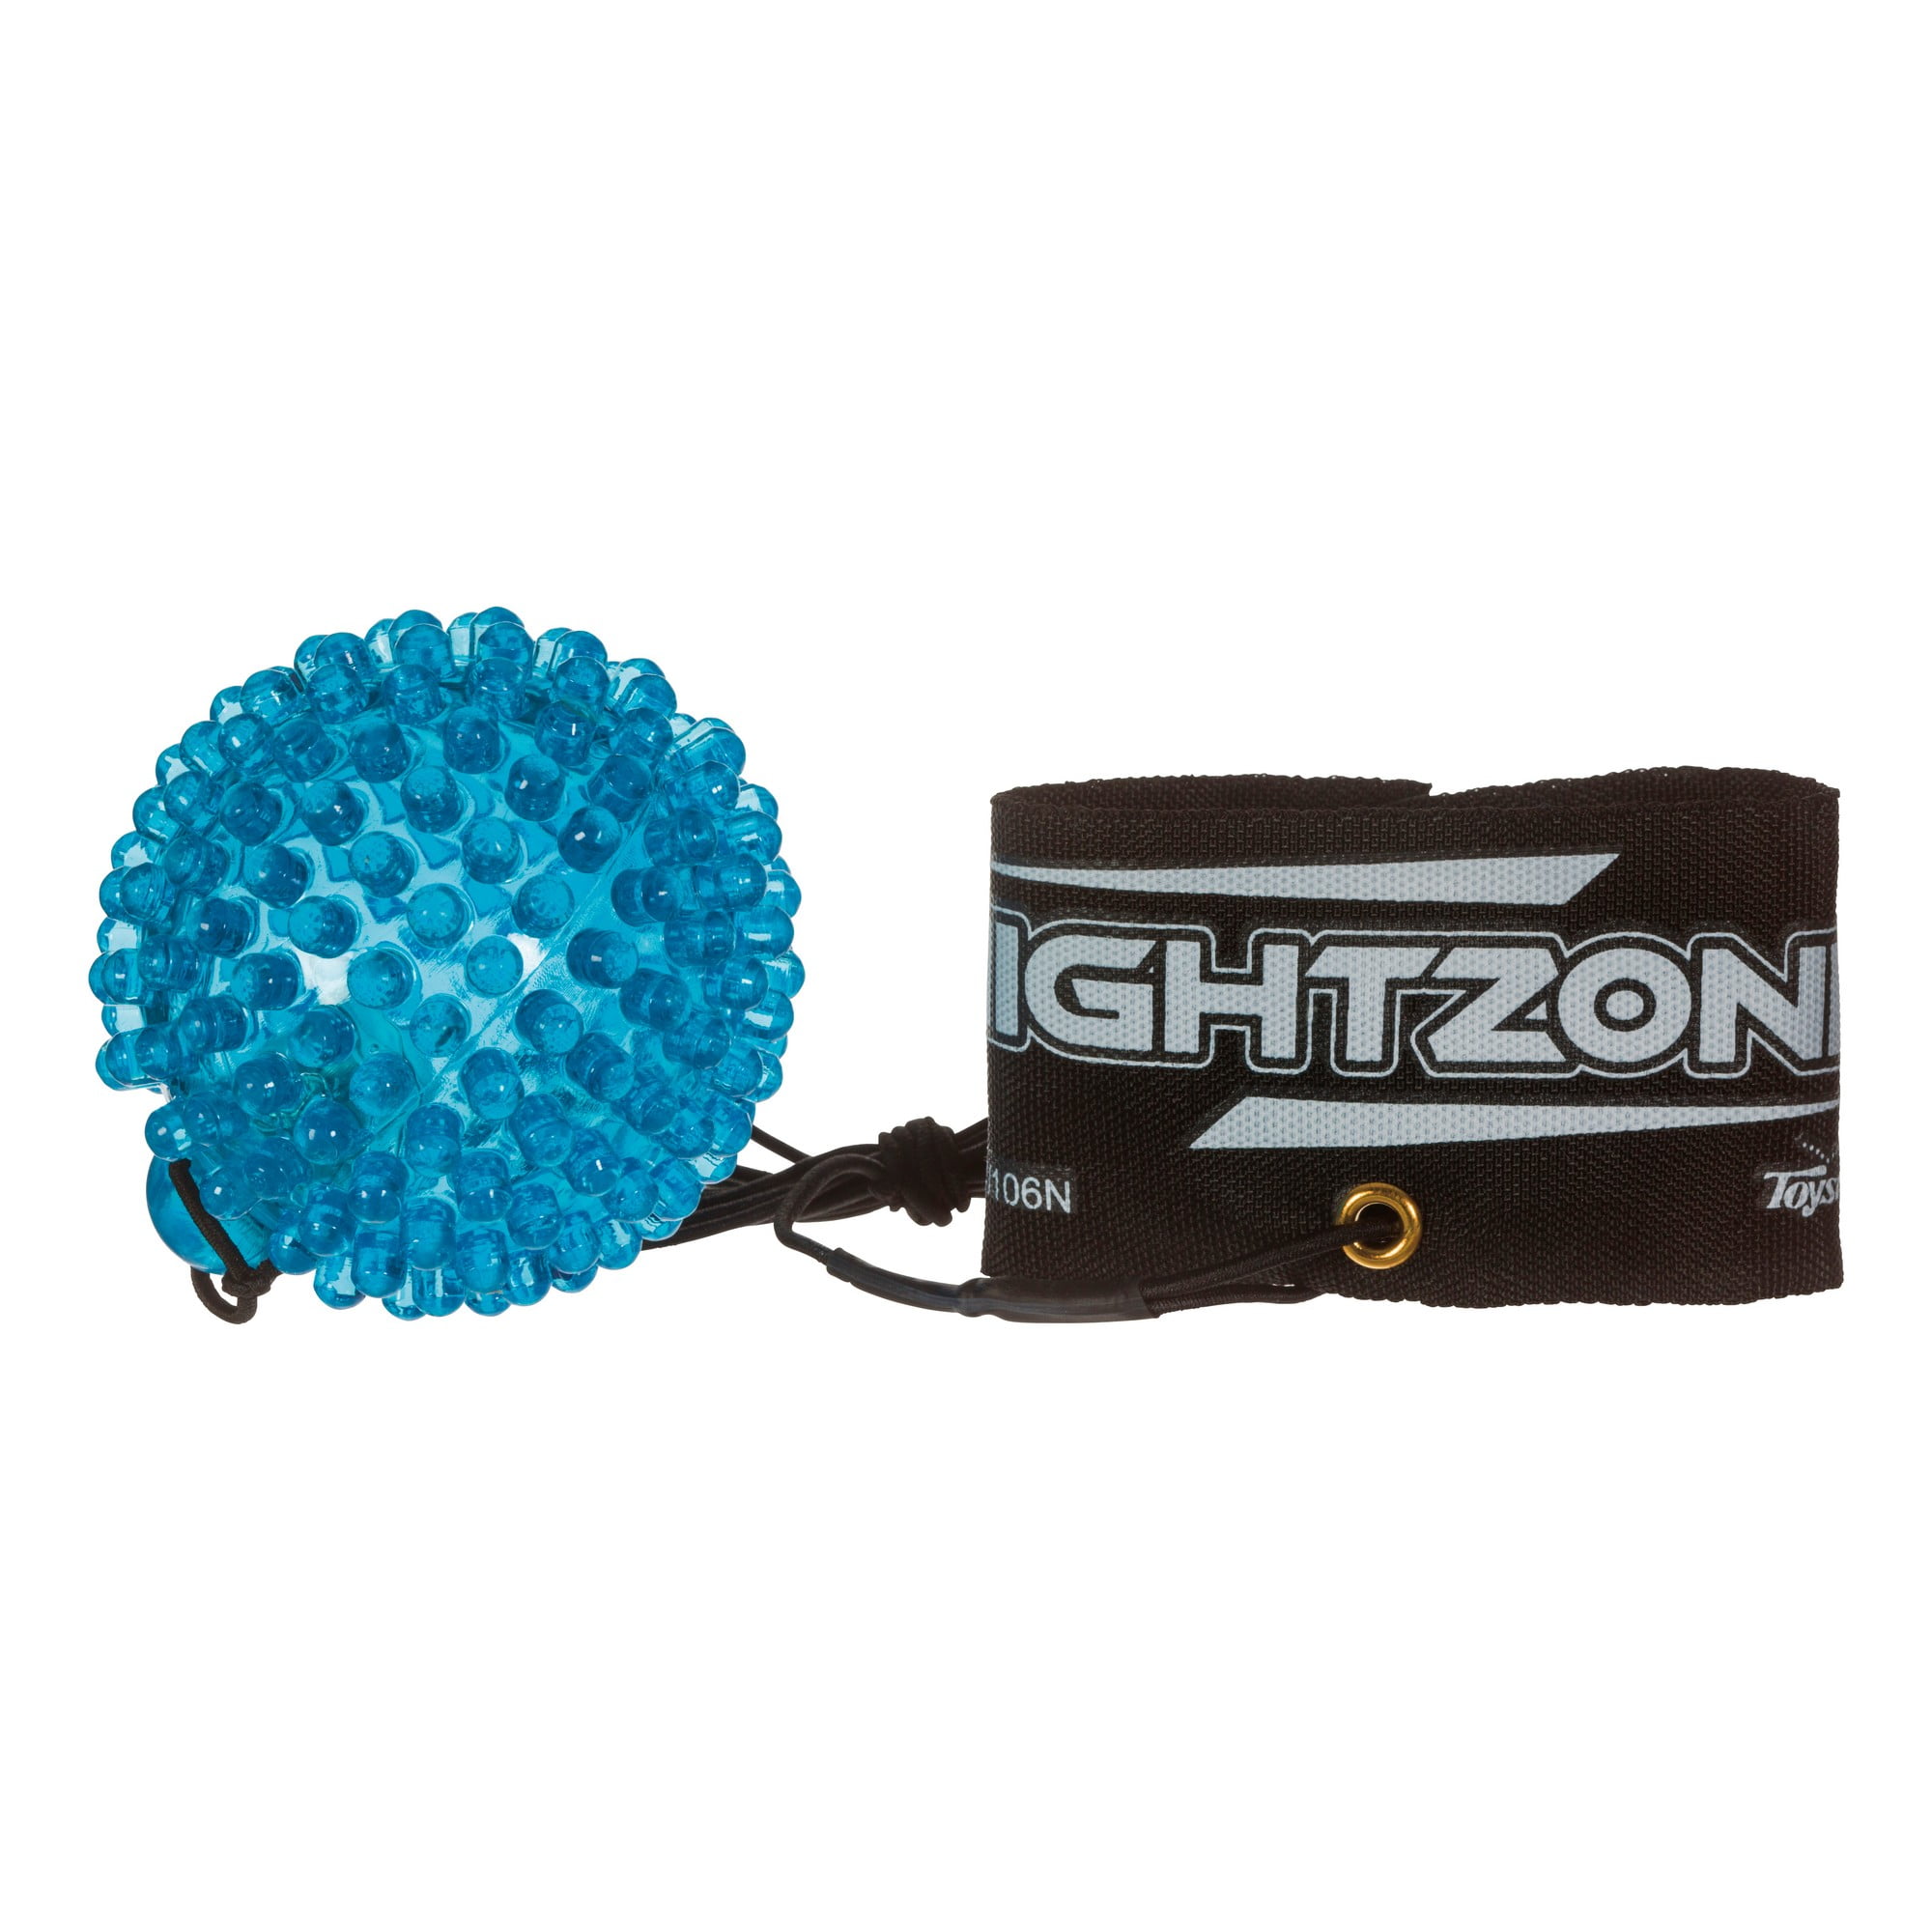 Nightzone Light up Sports Flash Back Rebound Ball Individually Colors VA for sale online 